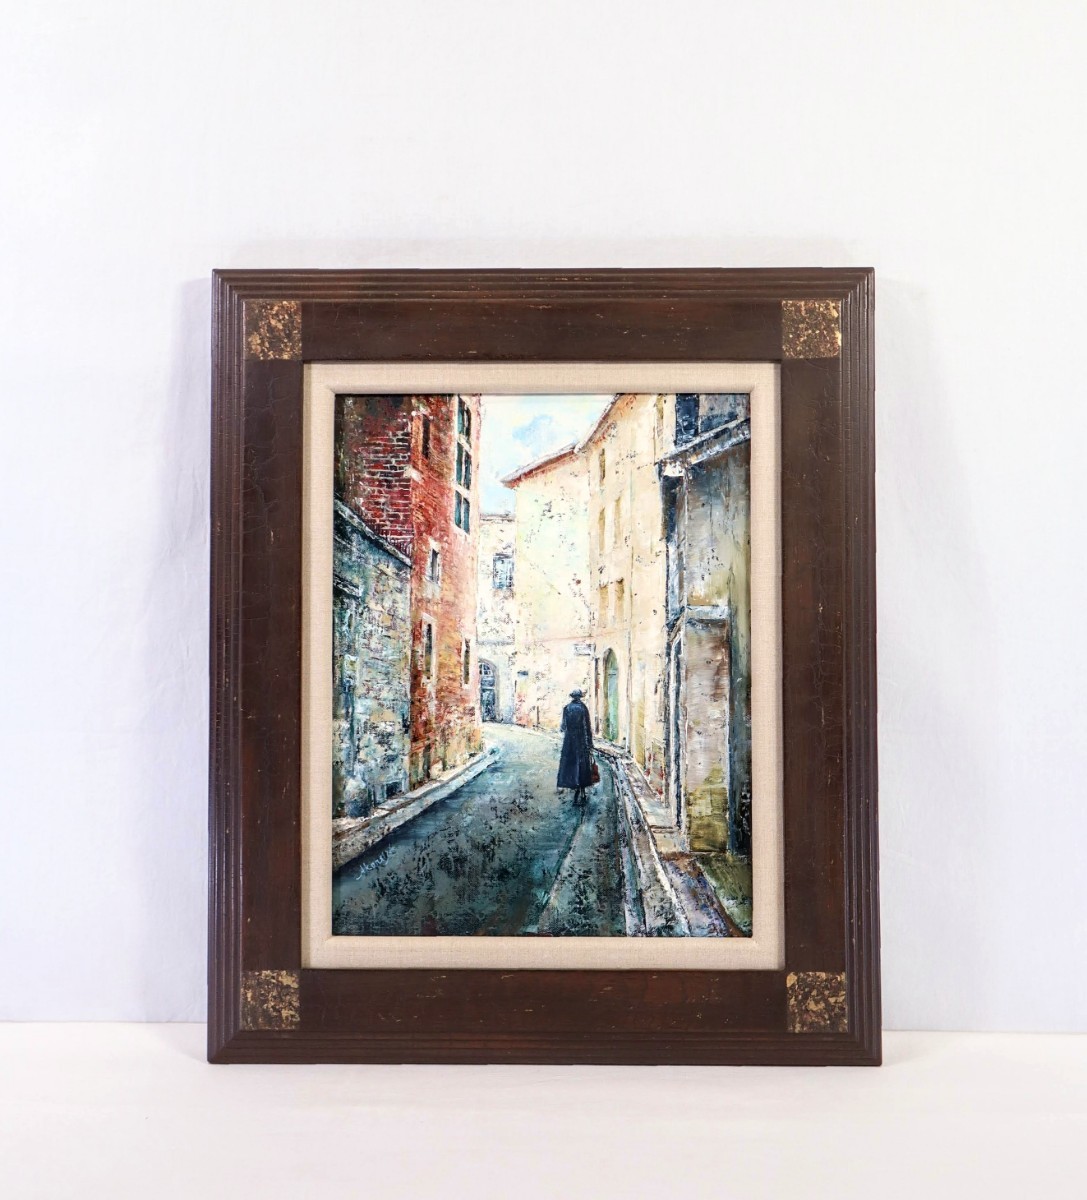 Authentic Akane Nakano Oil Painting Agen - Back Street of the Museum Size F6 Born in Hyogo Prefecture Shigehiro Kawakatsu Studied under Yoshihiko Kusaka A town in the southwestern part of France where you can feel the real France 8625, painting, oil painting, Nature, Landscape painting